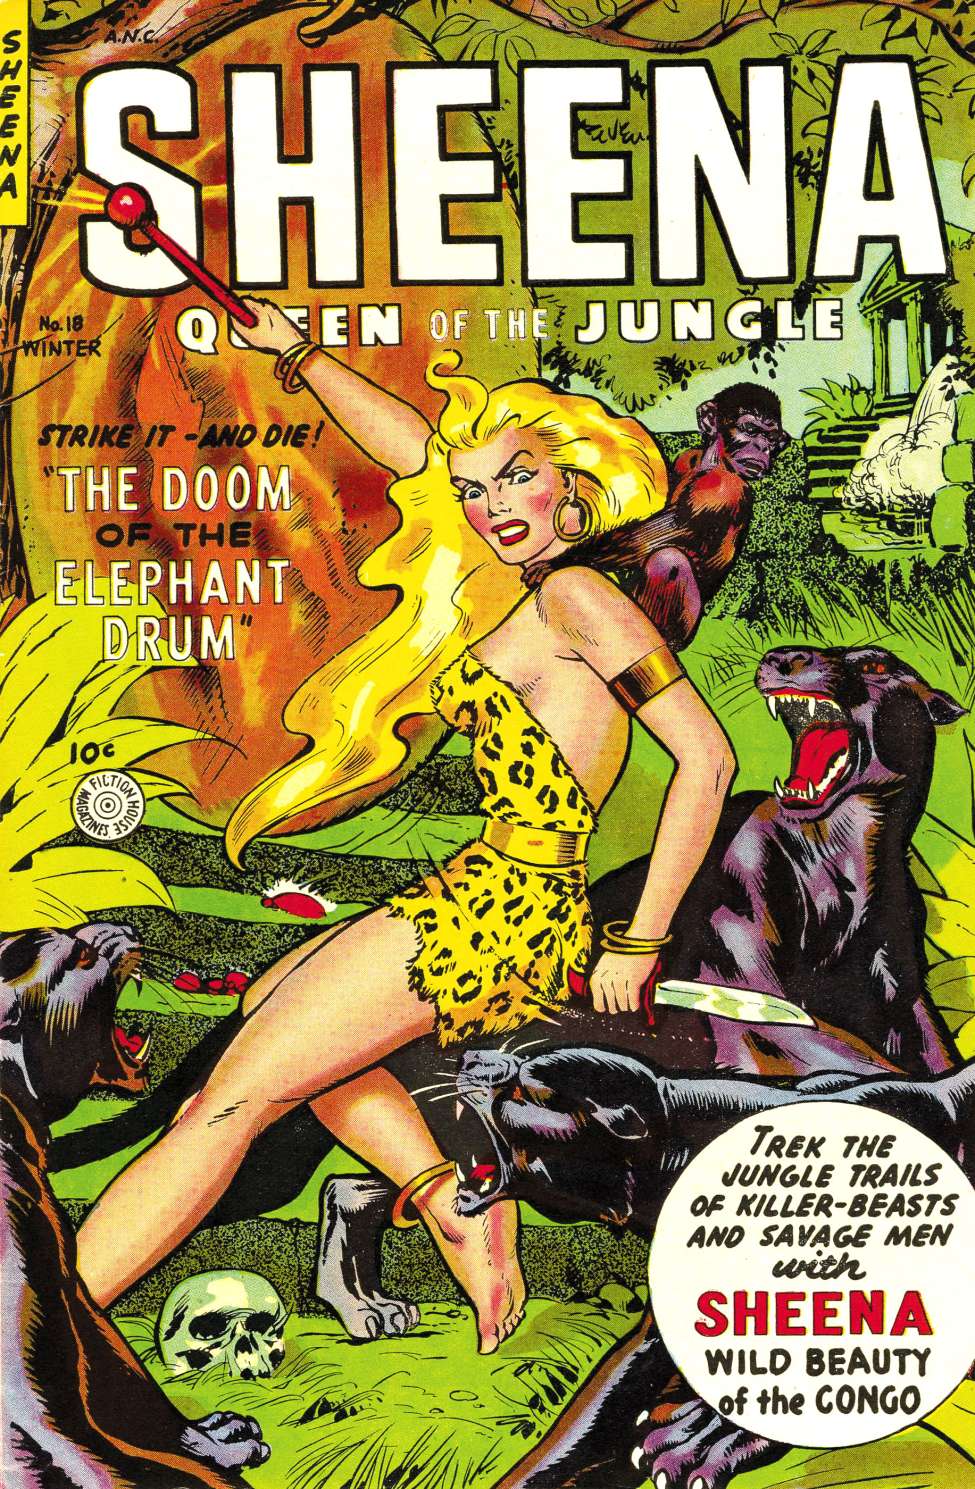 Book Cover For Sheena, Queen of the Jungle 18 - Version 2